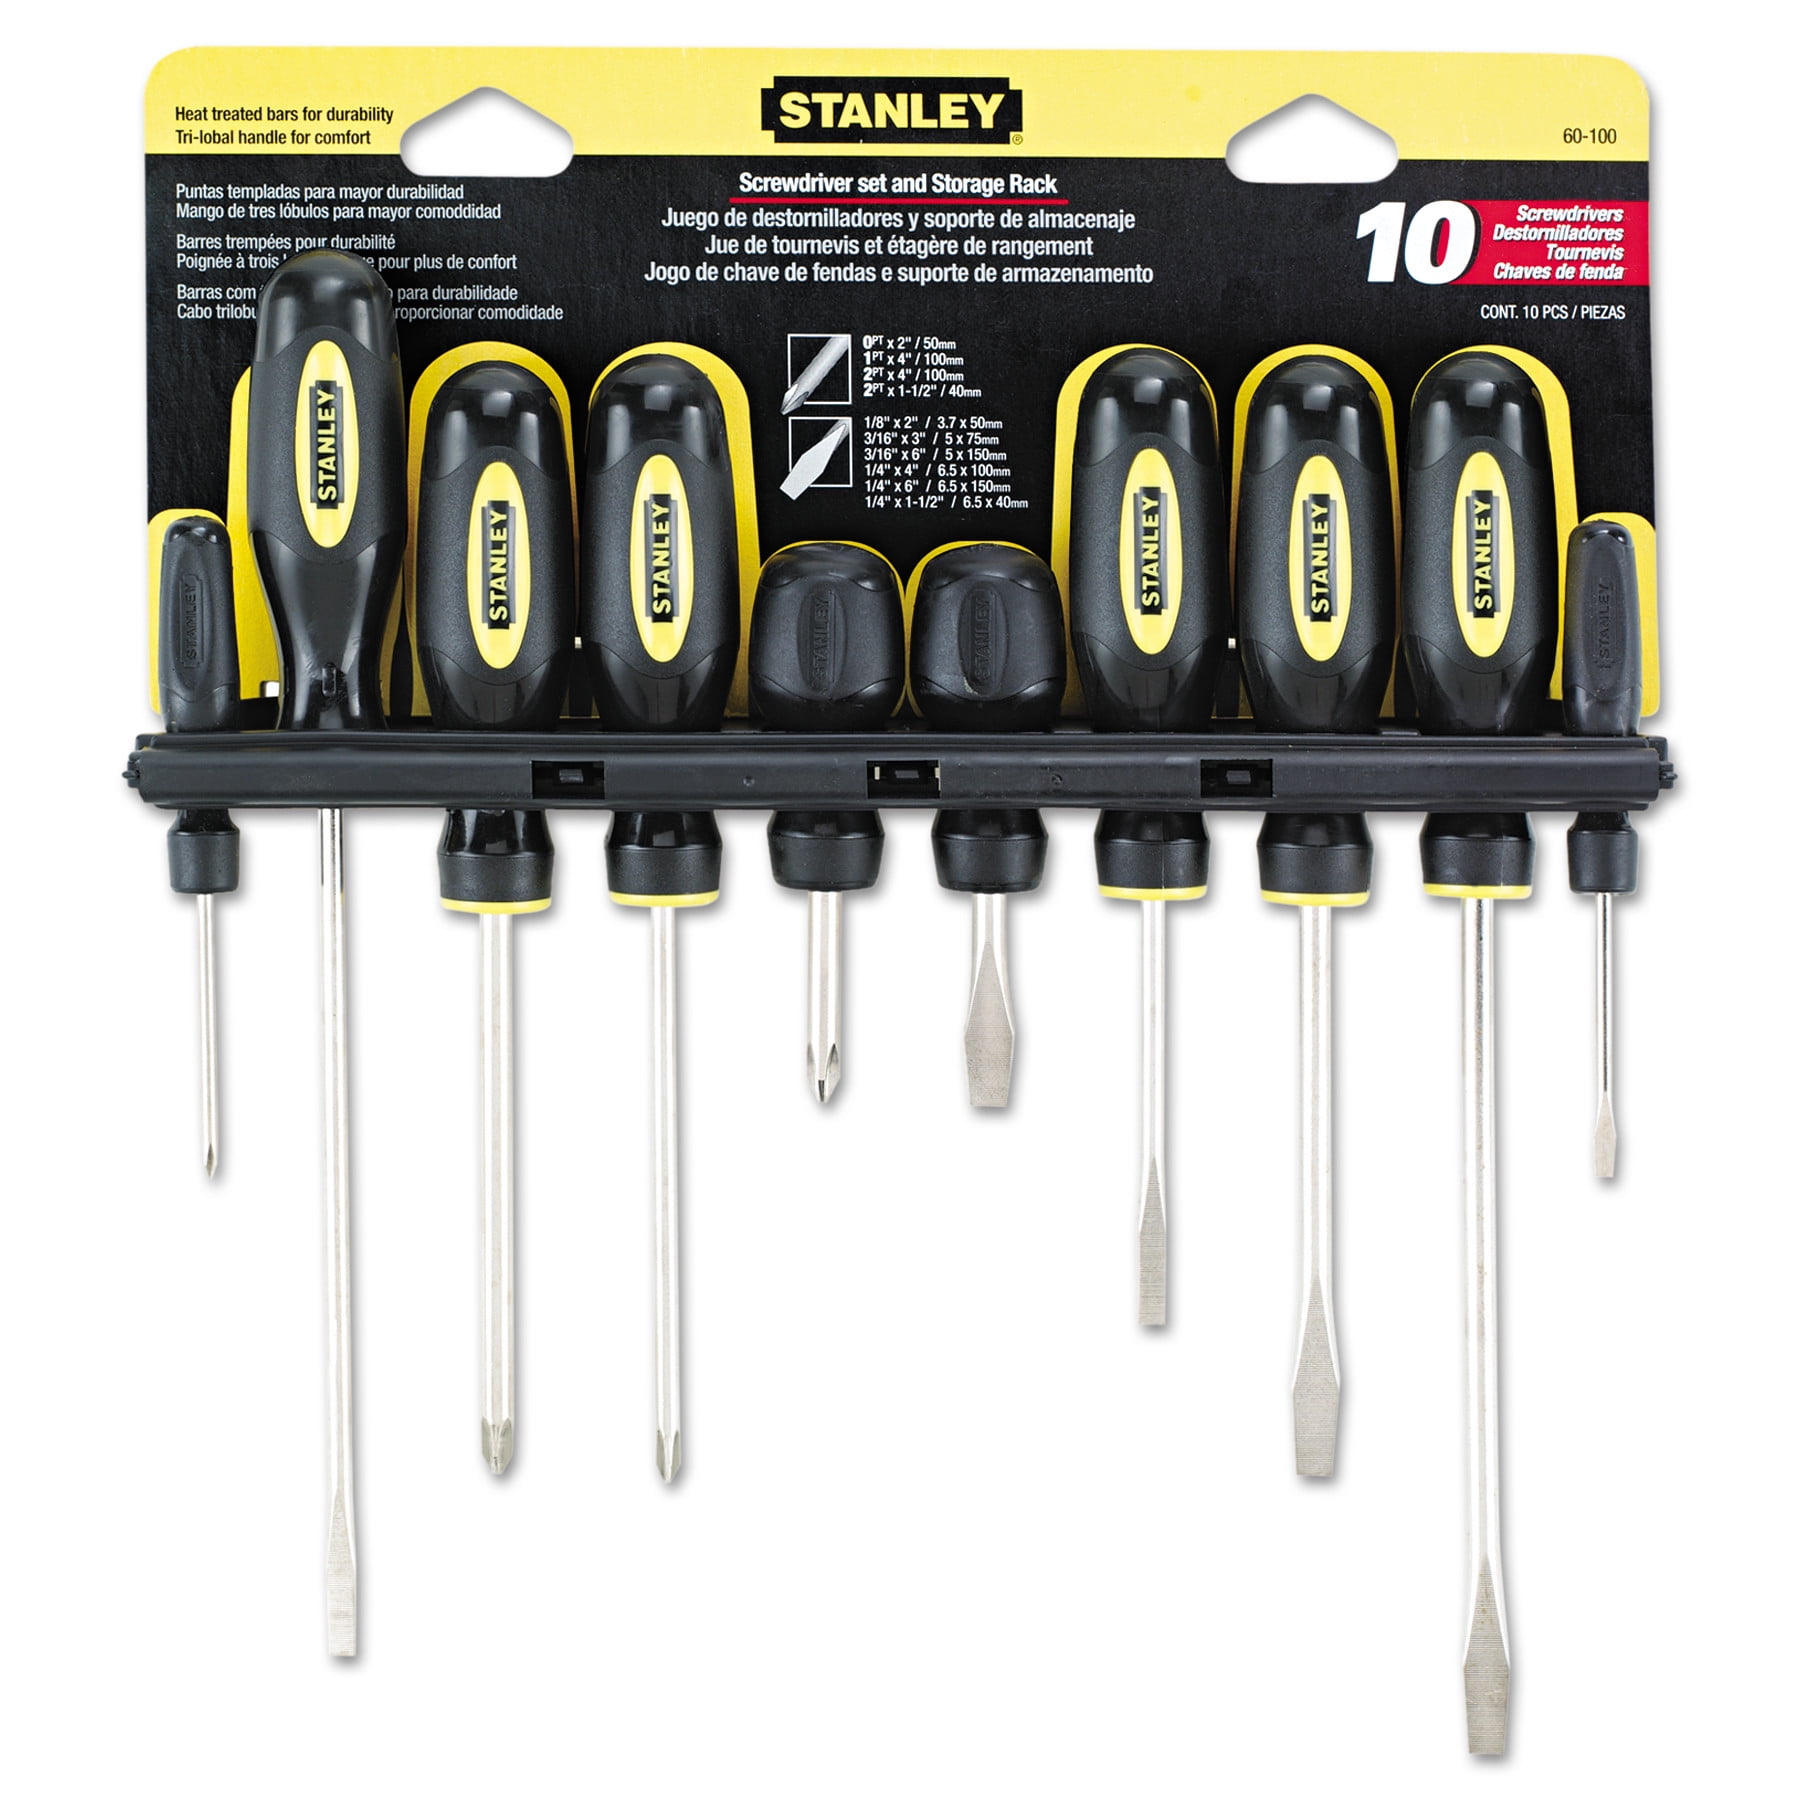 1 PT Phillips Tip Carded Stanley Tools 65-321 Handyman 4" Screwdriver Lot of 6 